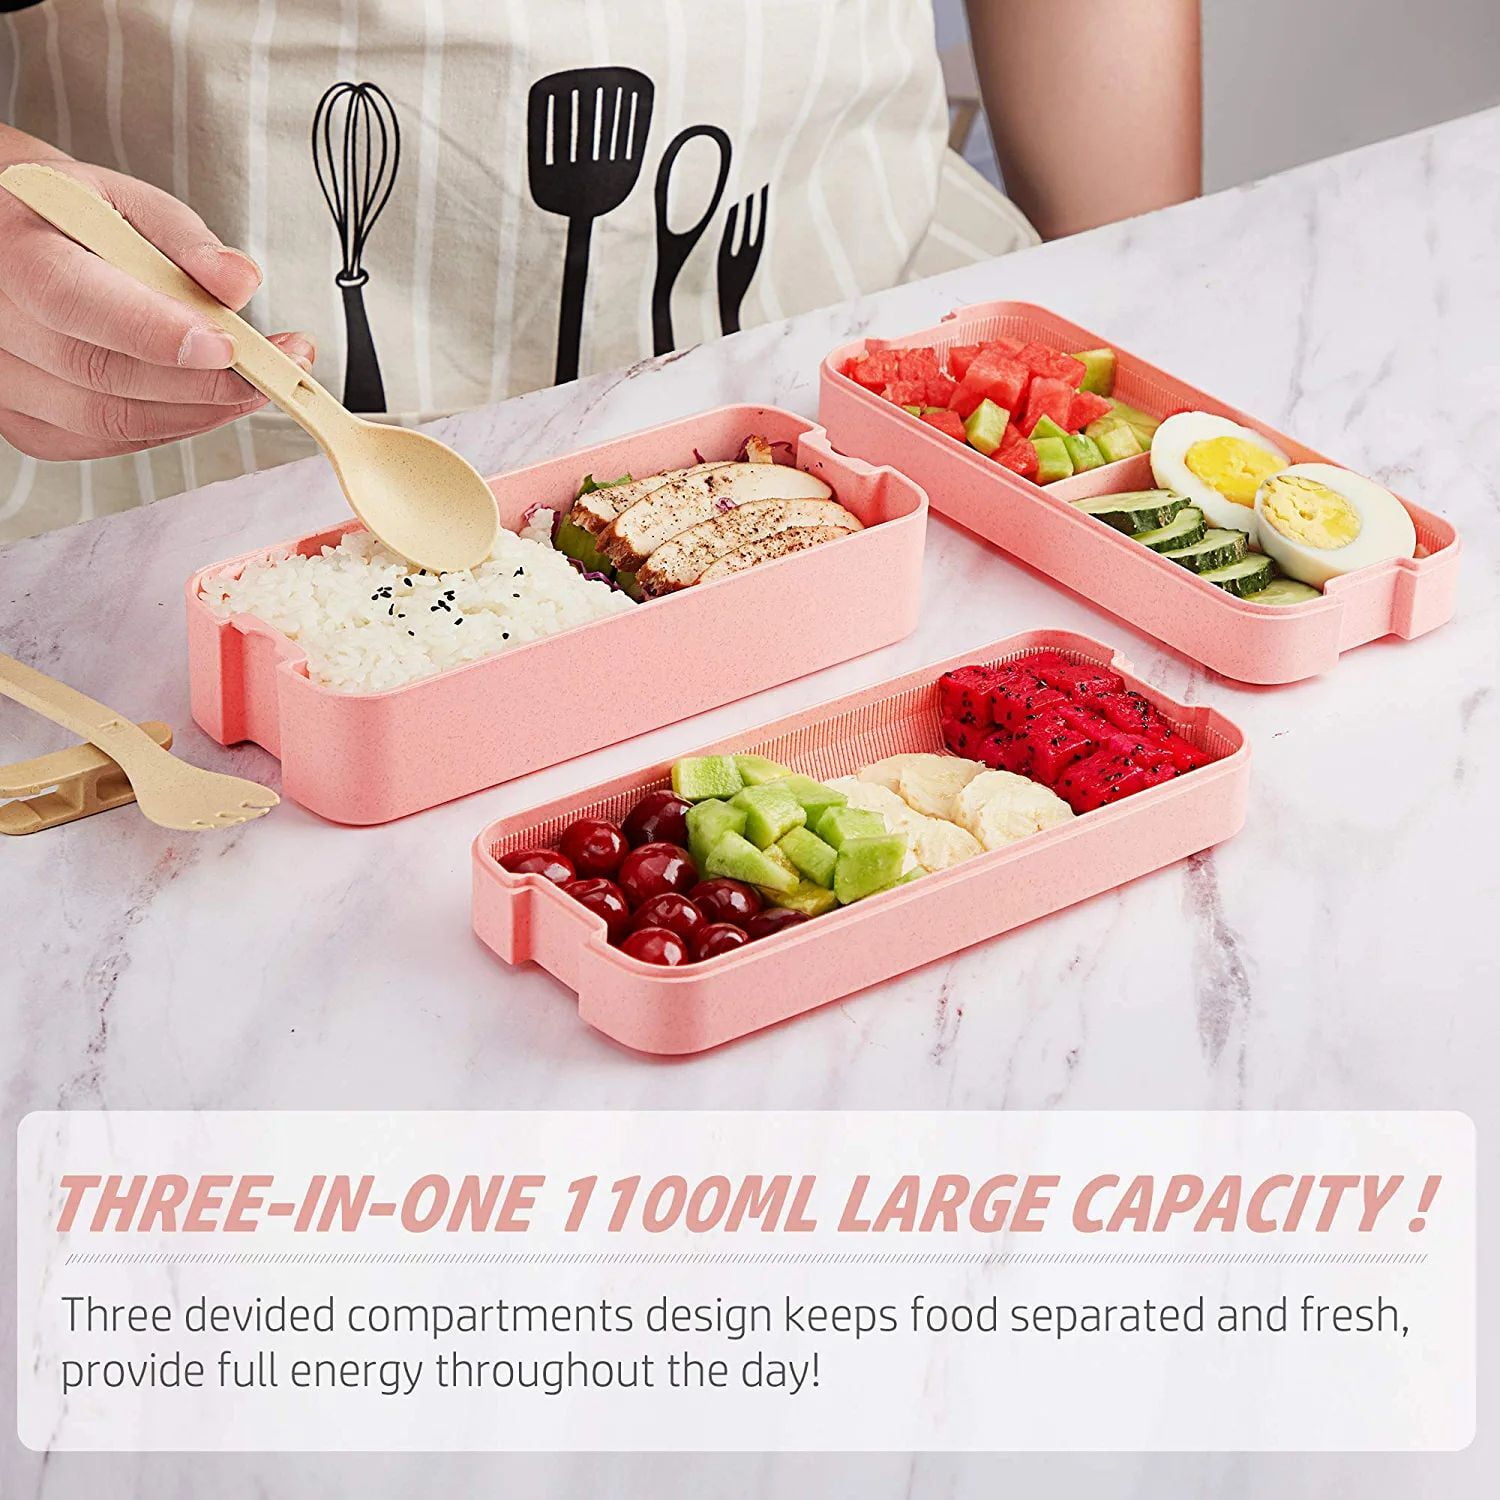 Caperci Fresh Bento Lunch Box for Kids, Leak-Proof 3 Compartments Adult  Lunch Container Kids Bento Box (with Fork and Spoon), BPA-Free, 900ml  (Pink) 